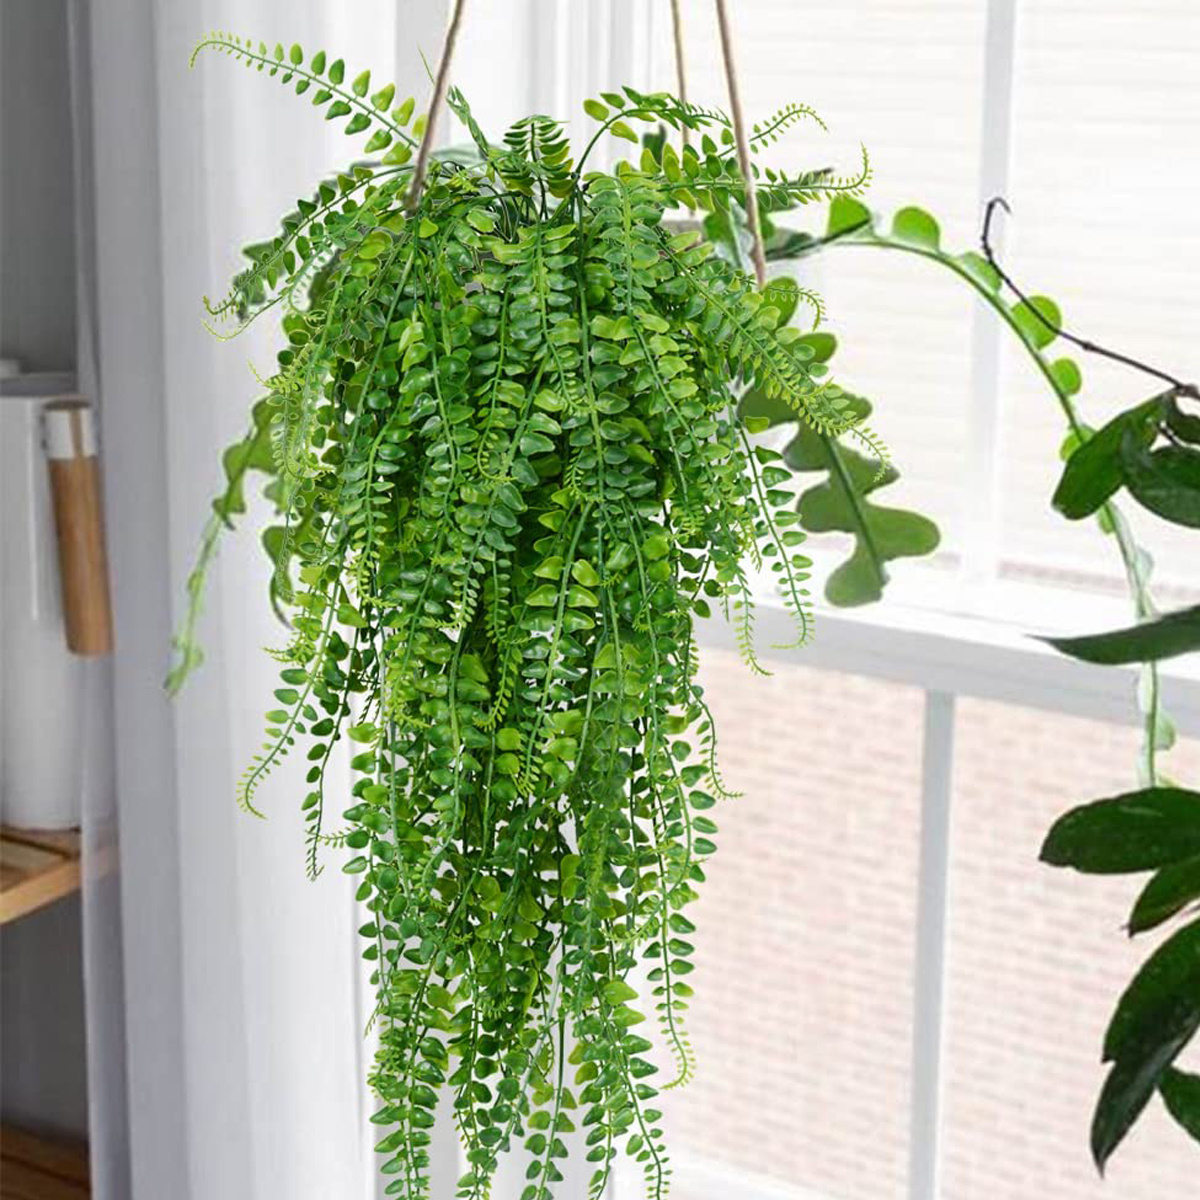 CATTREE Artificial Hanging Vines Plants Fake Boston Ivy Ferns 4 Pcs Plant,  Faux Vine Greenery Leaves Rattan for Outdoor UV Resistant for Wall Indoor